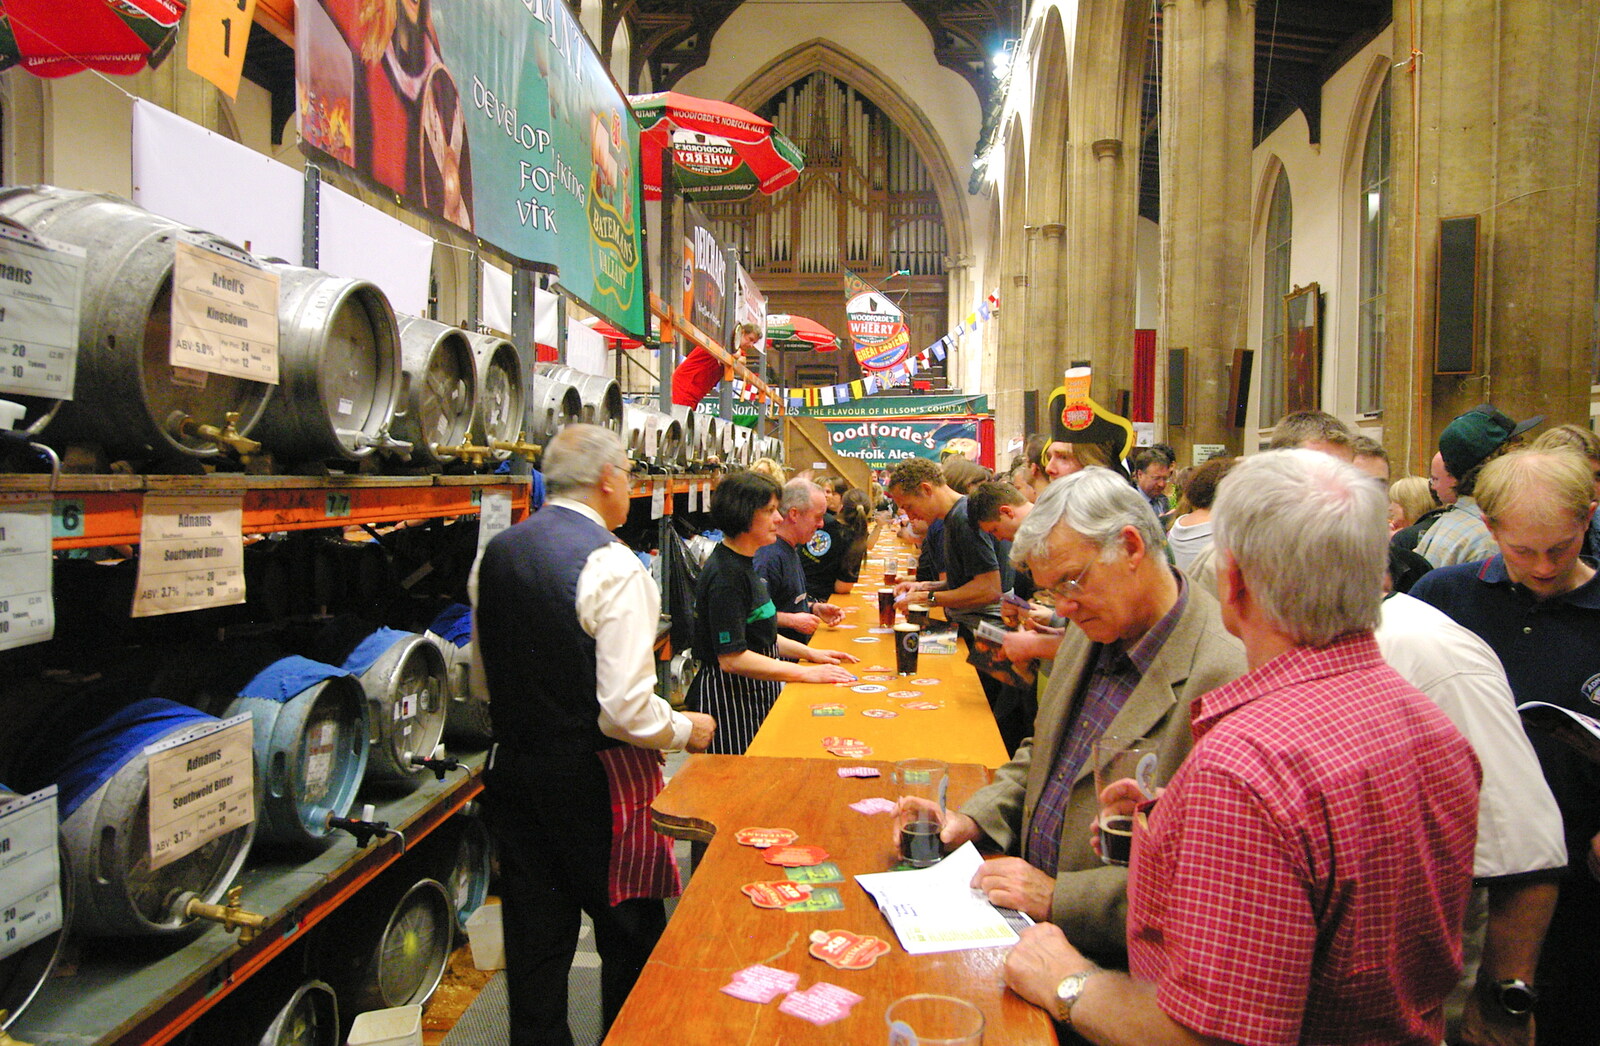 The 28th Norwich Beer Festival, St. Andrew's Hall, Norwich - 26th October 2005: At the bar in St. Andrew's Hall